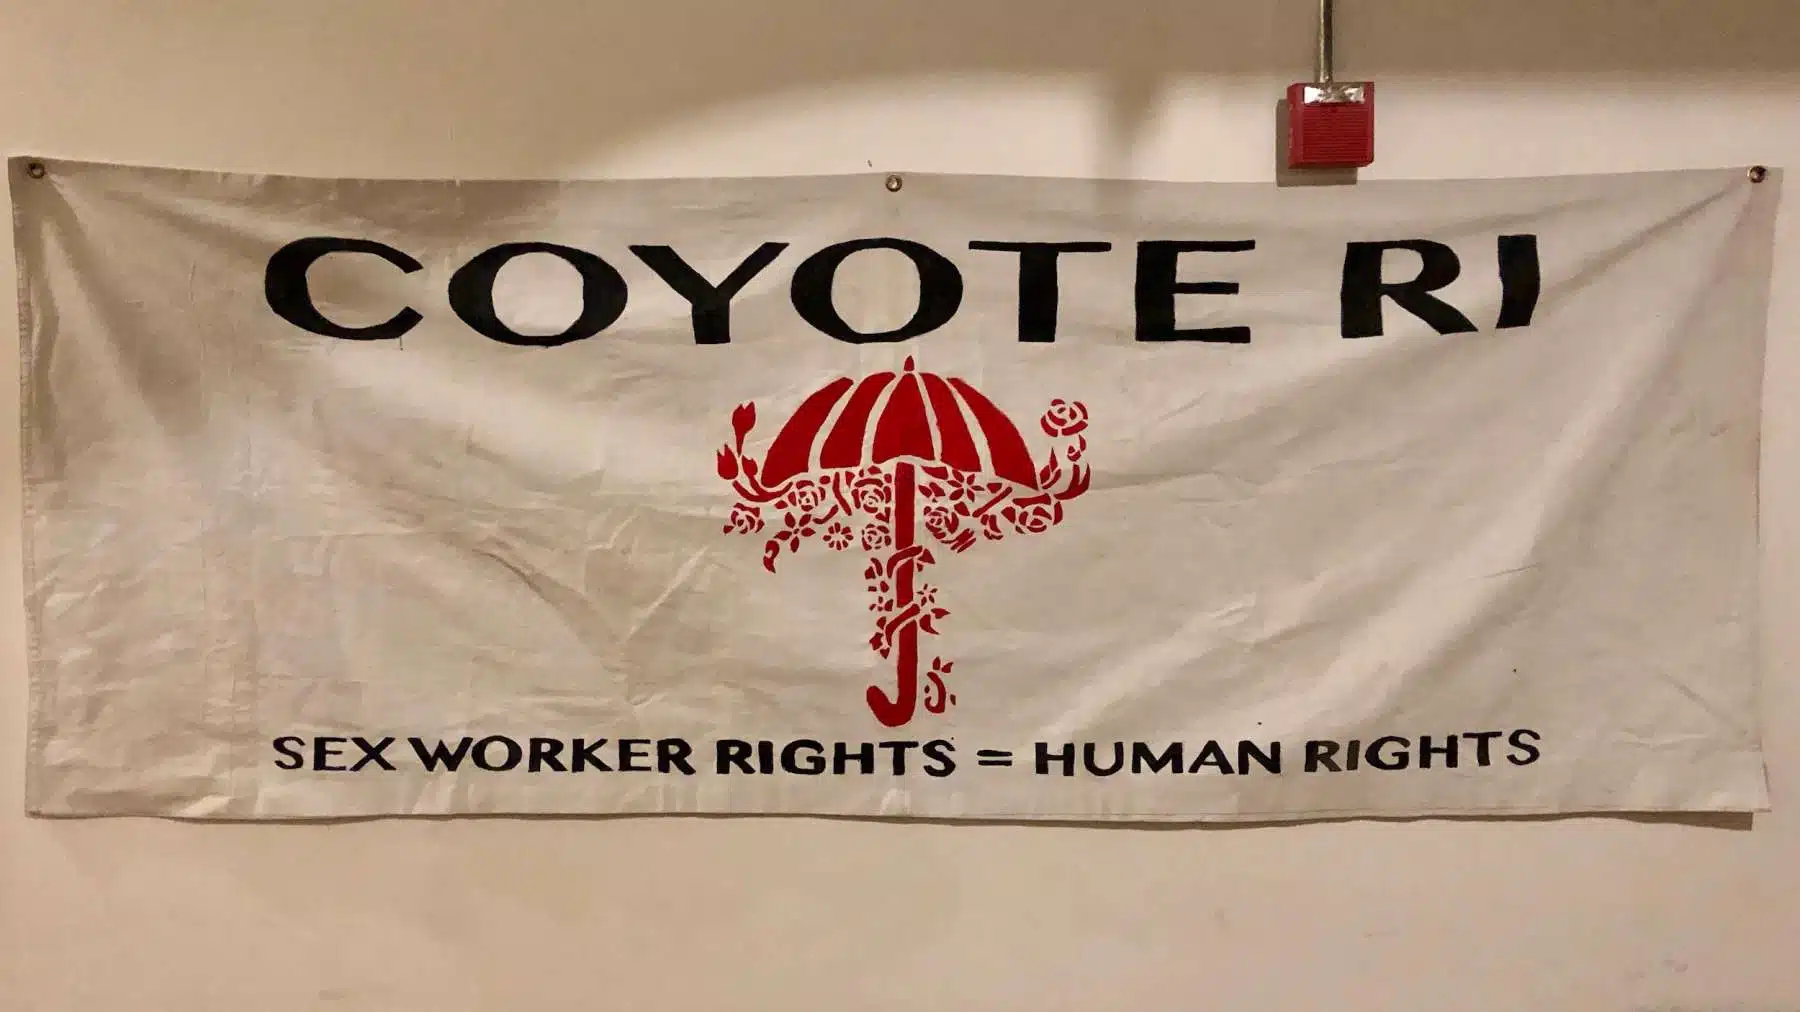 COYOTE RI observes the International Day to End Violence Against Sex Workers